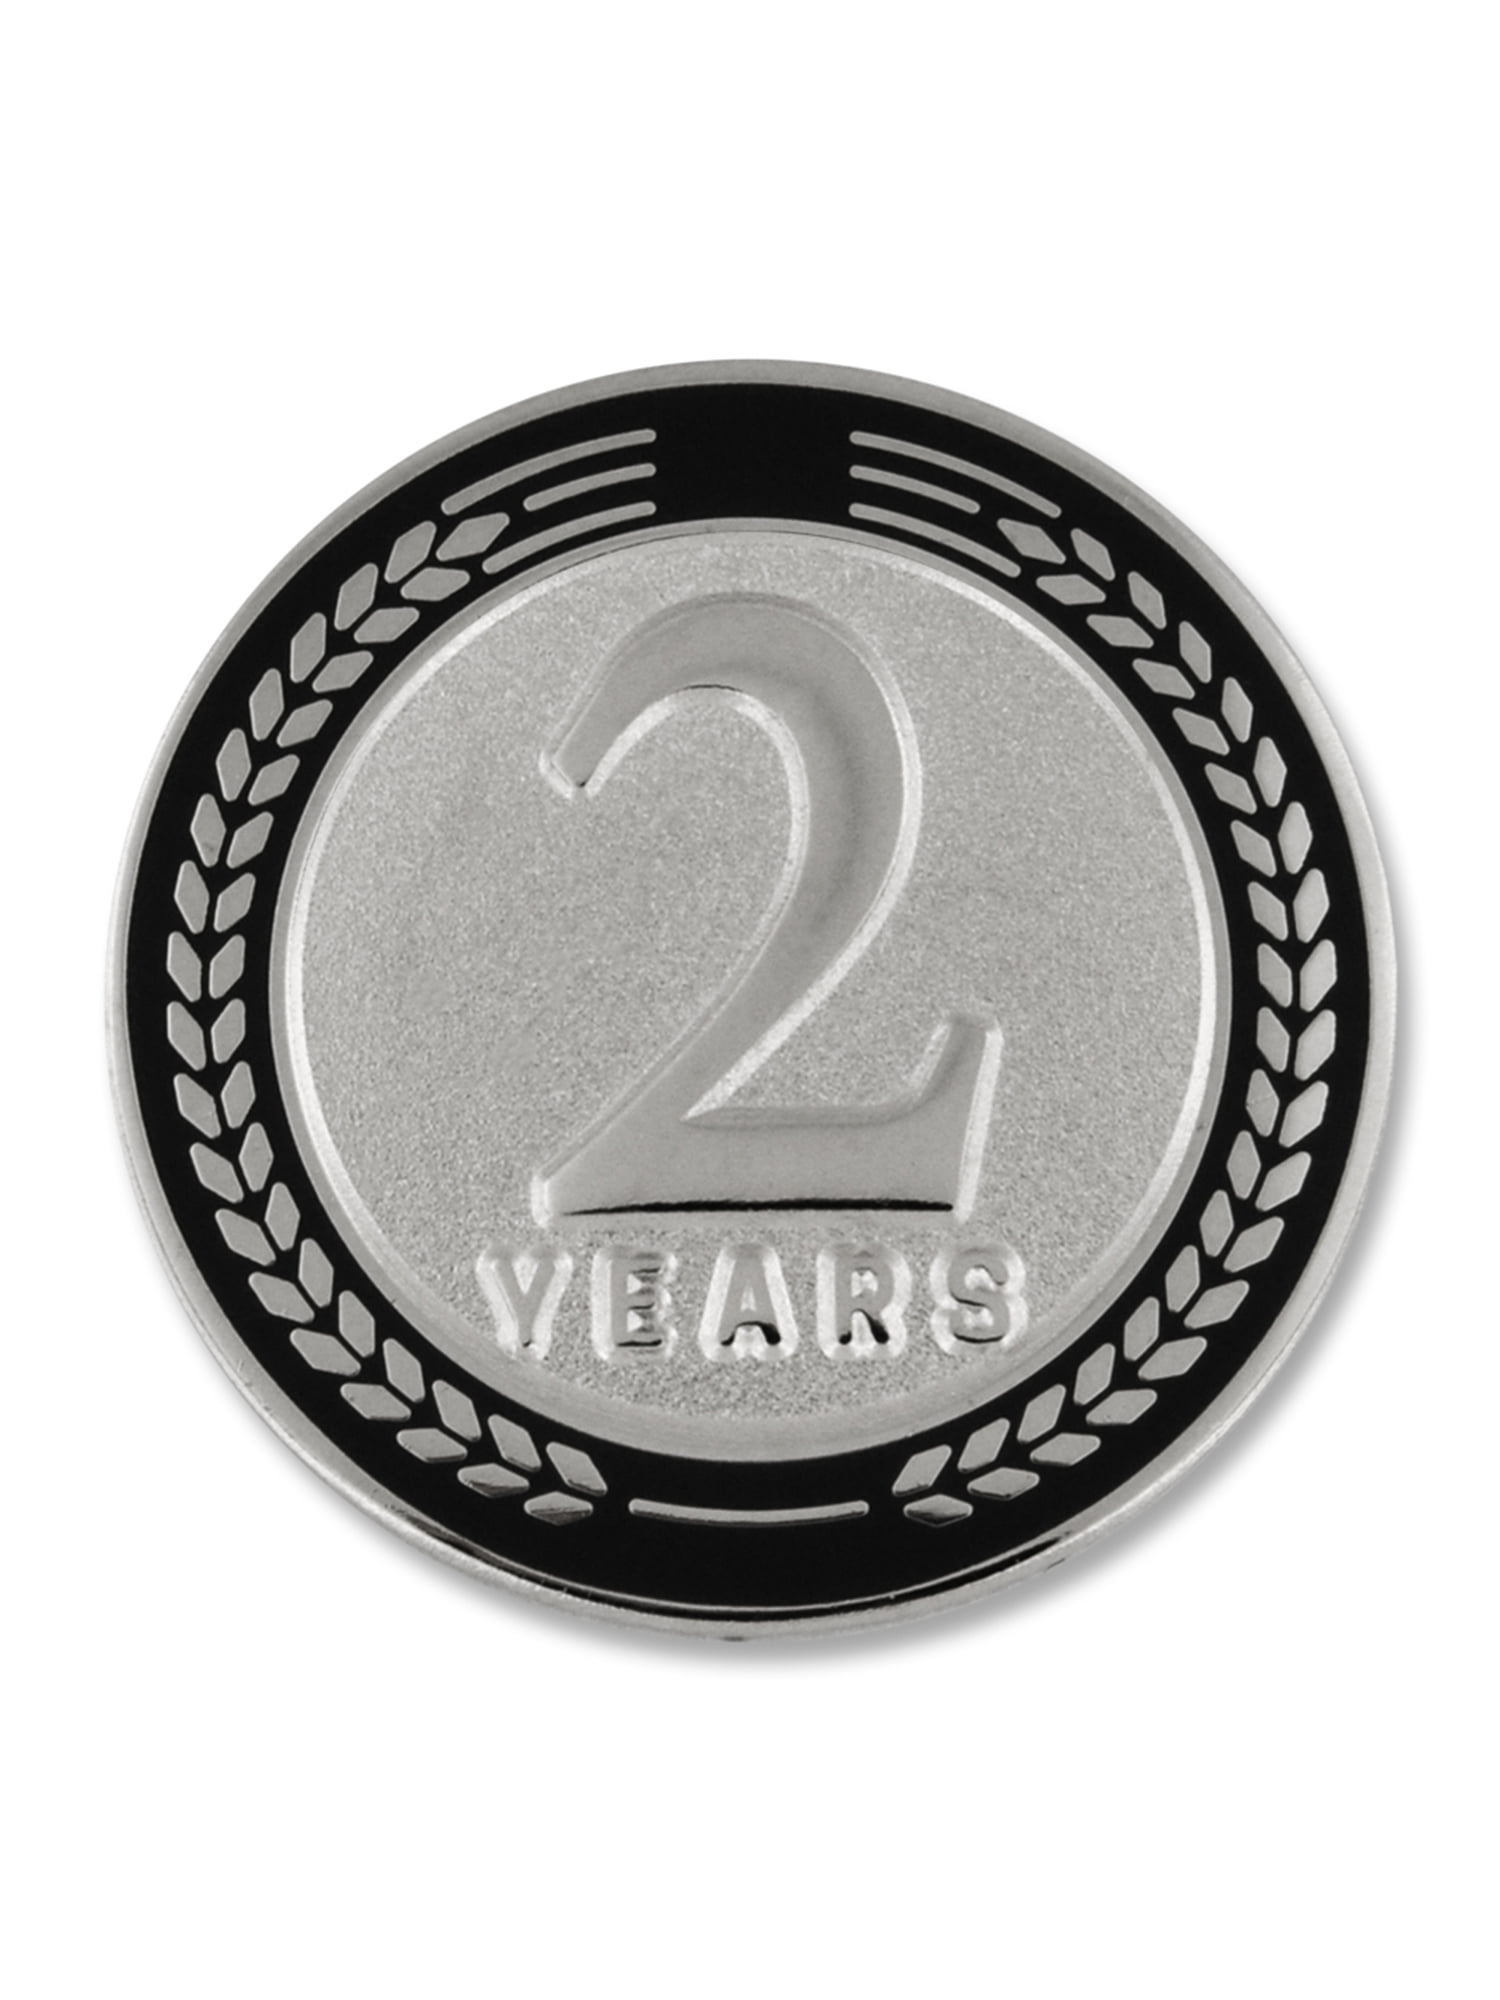 Black PinMart 25 Years of Service Award Employee Recognition Gift Lapel Pin